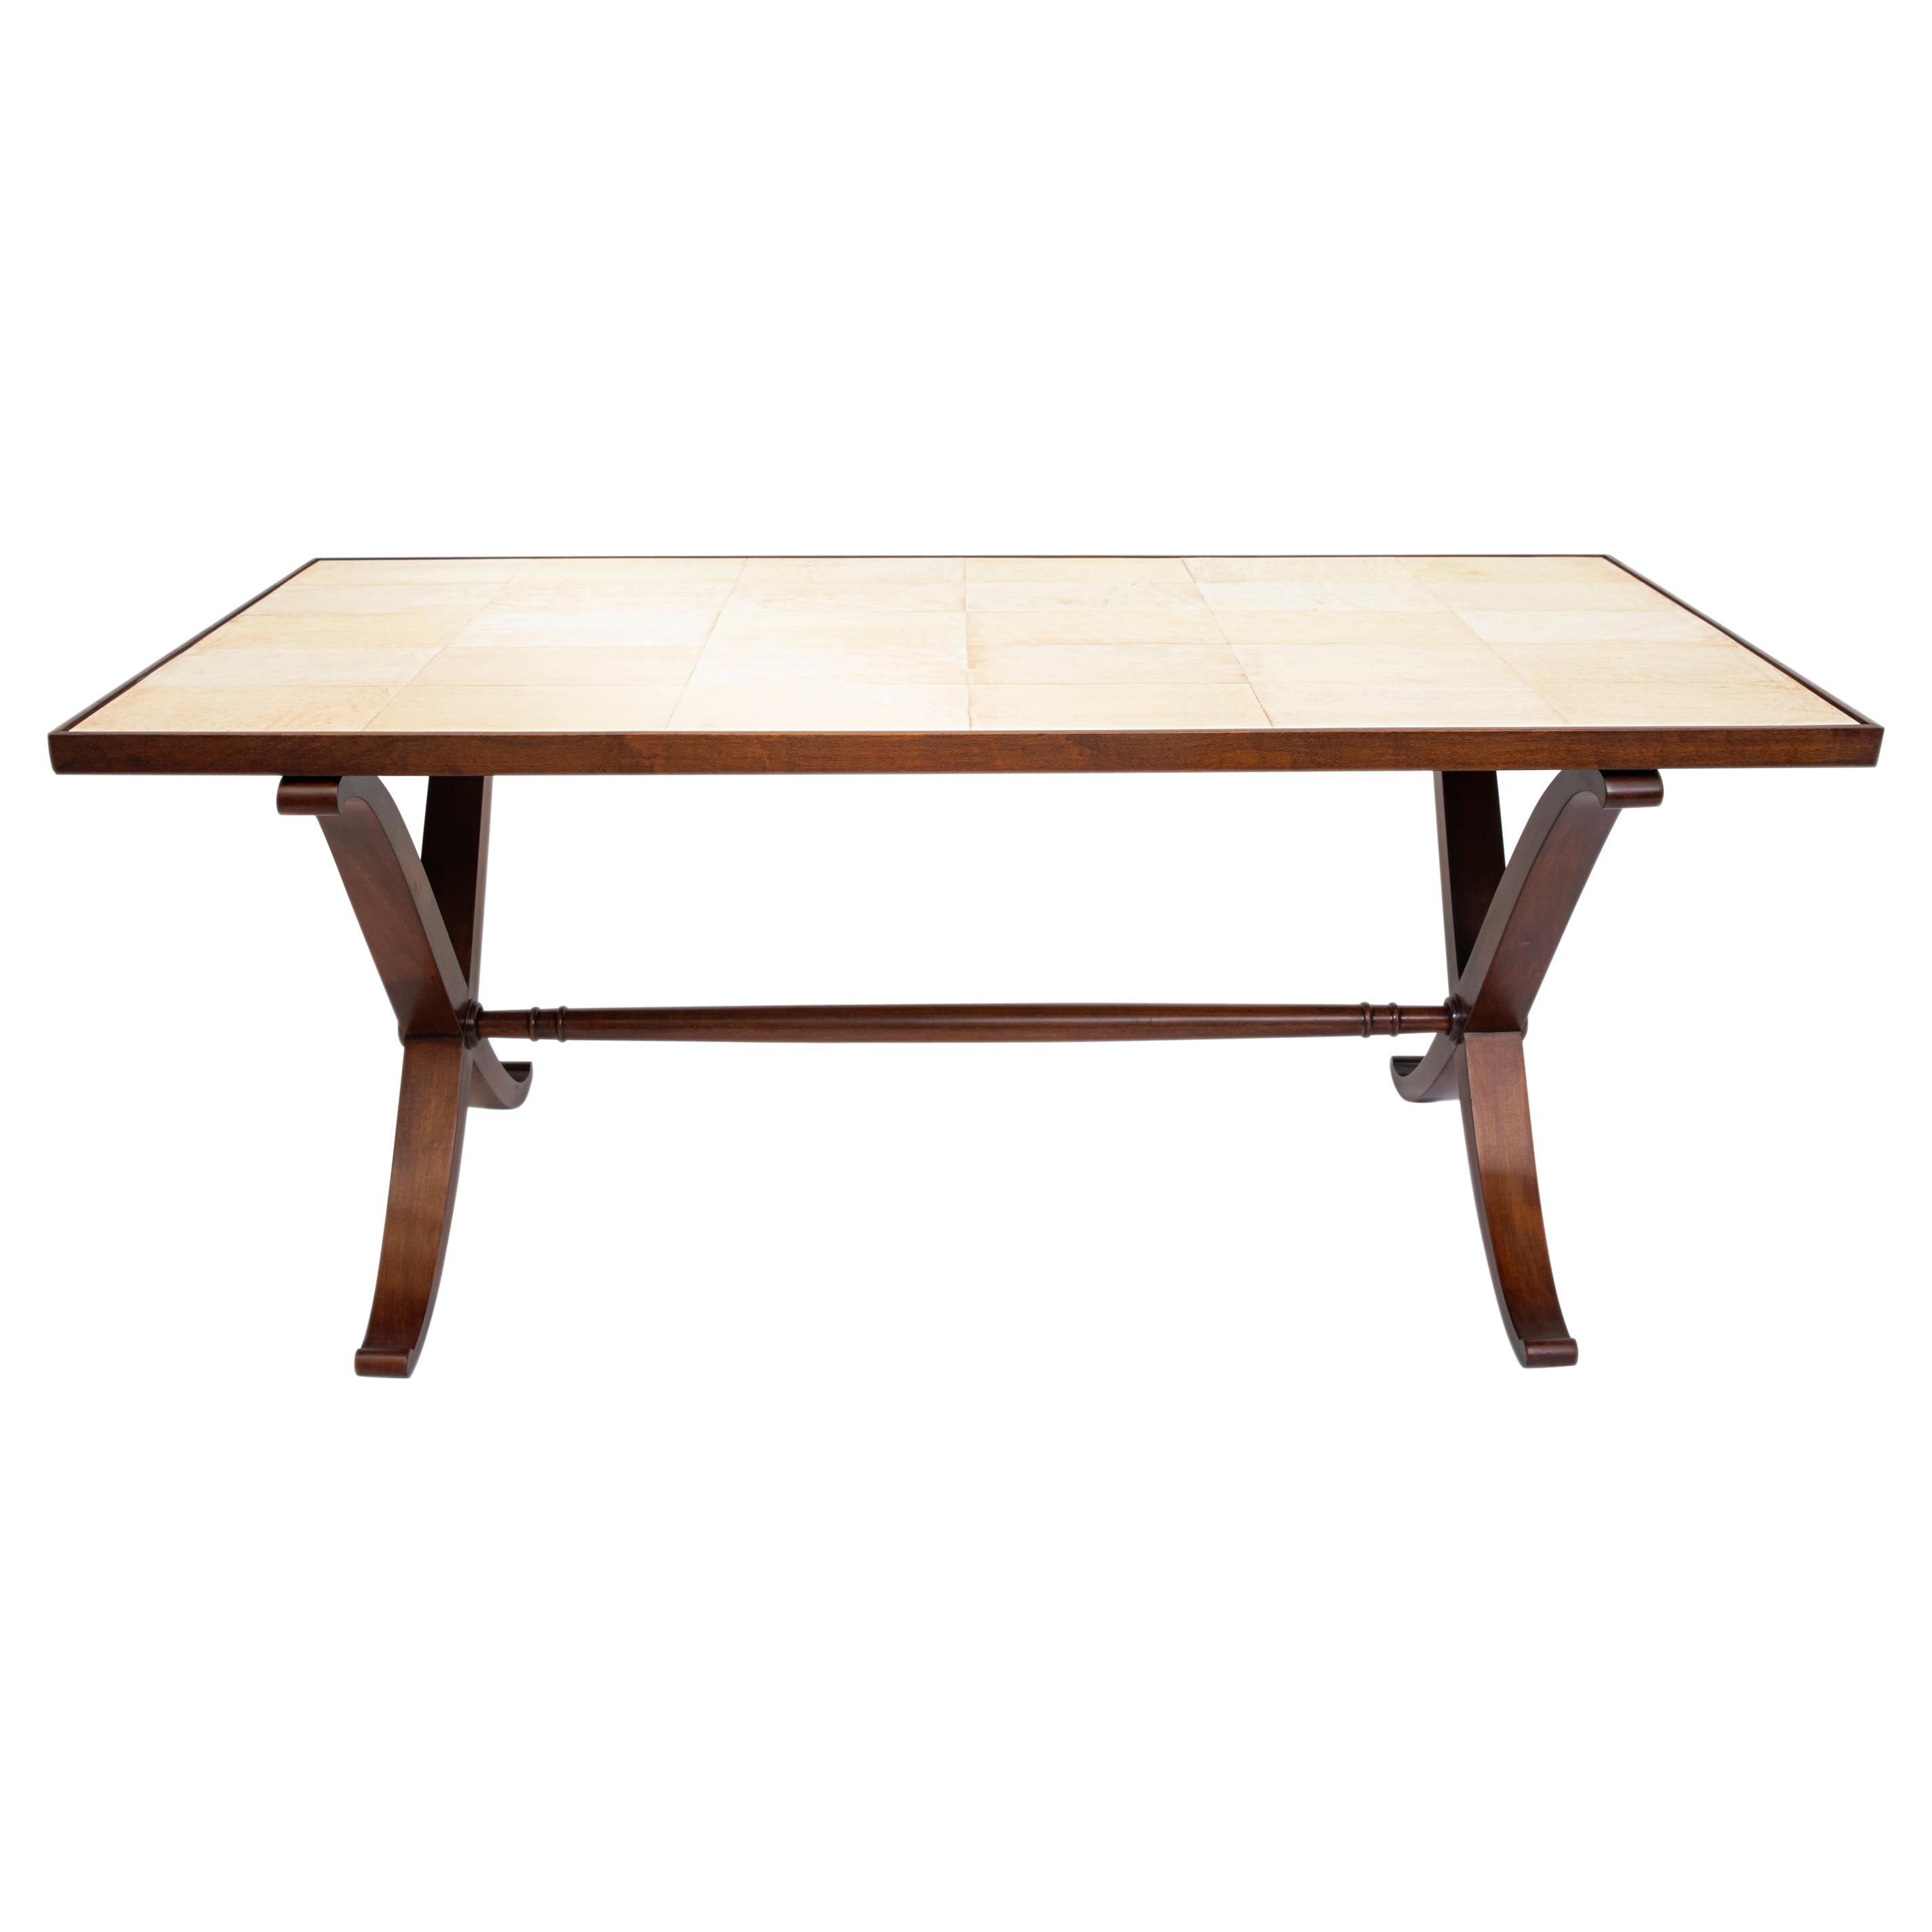 Wood and Parchment Low Table by Comte, Argentina, Buenos Aires, circa 1950